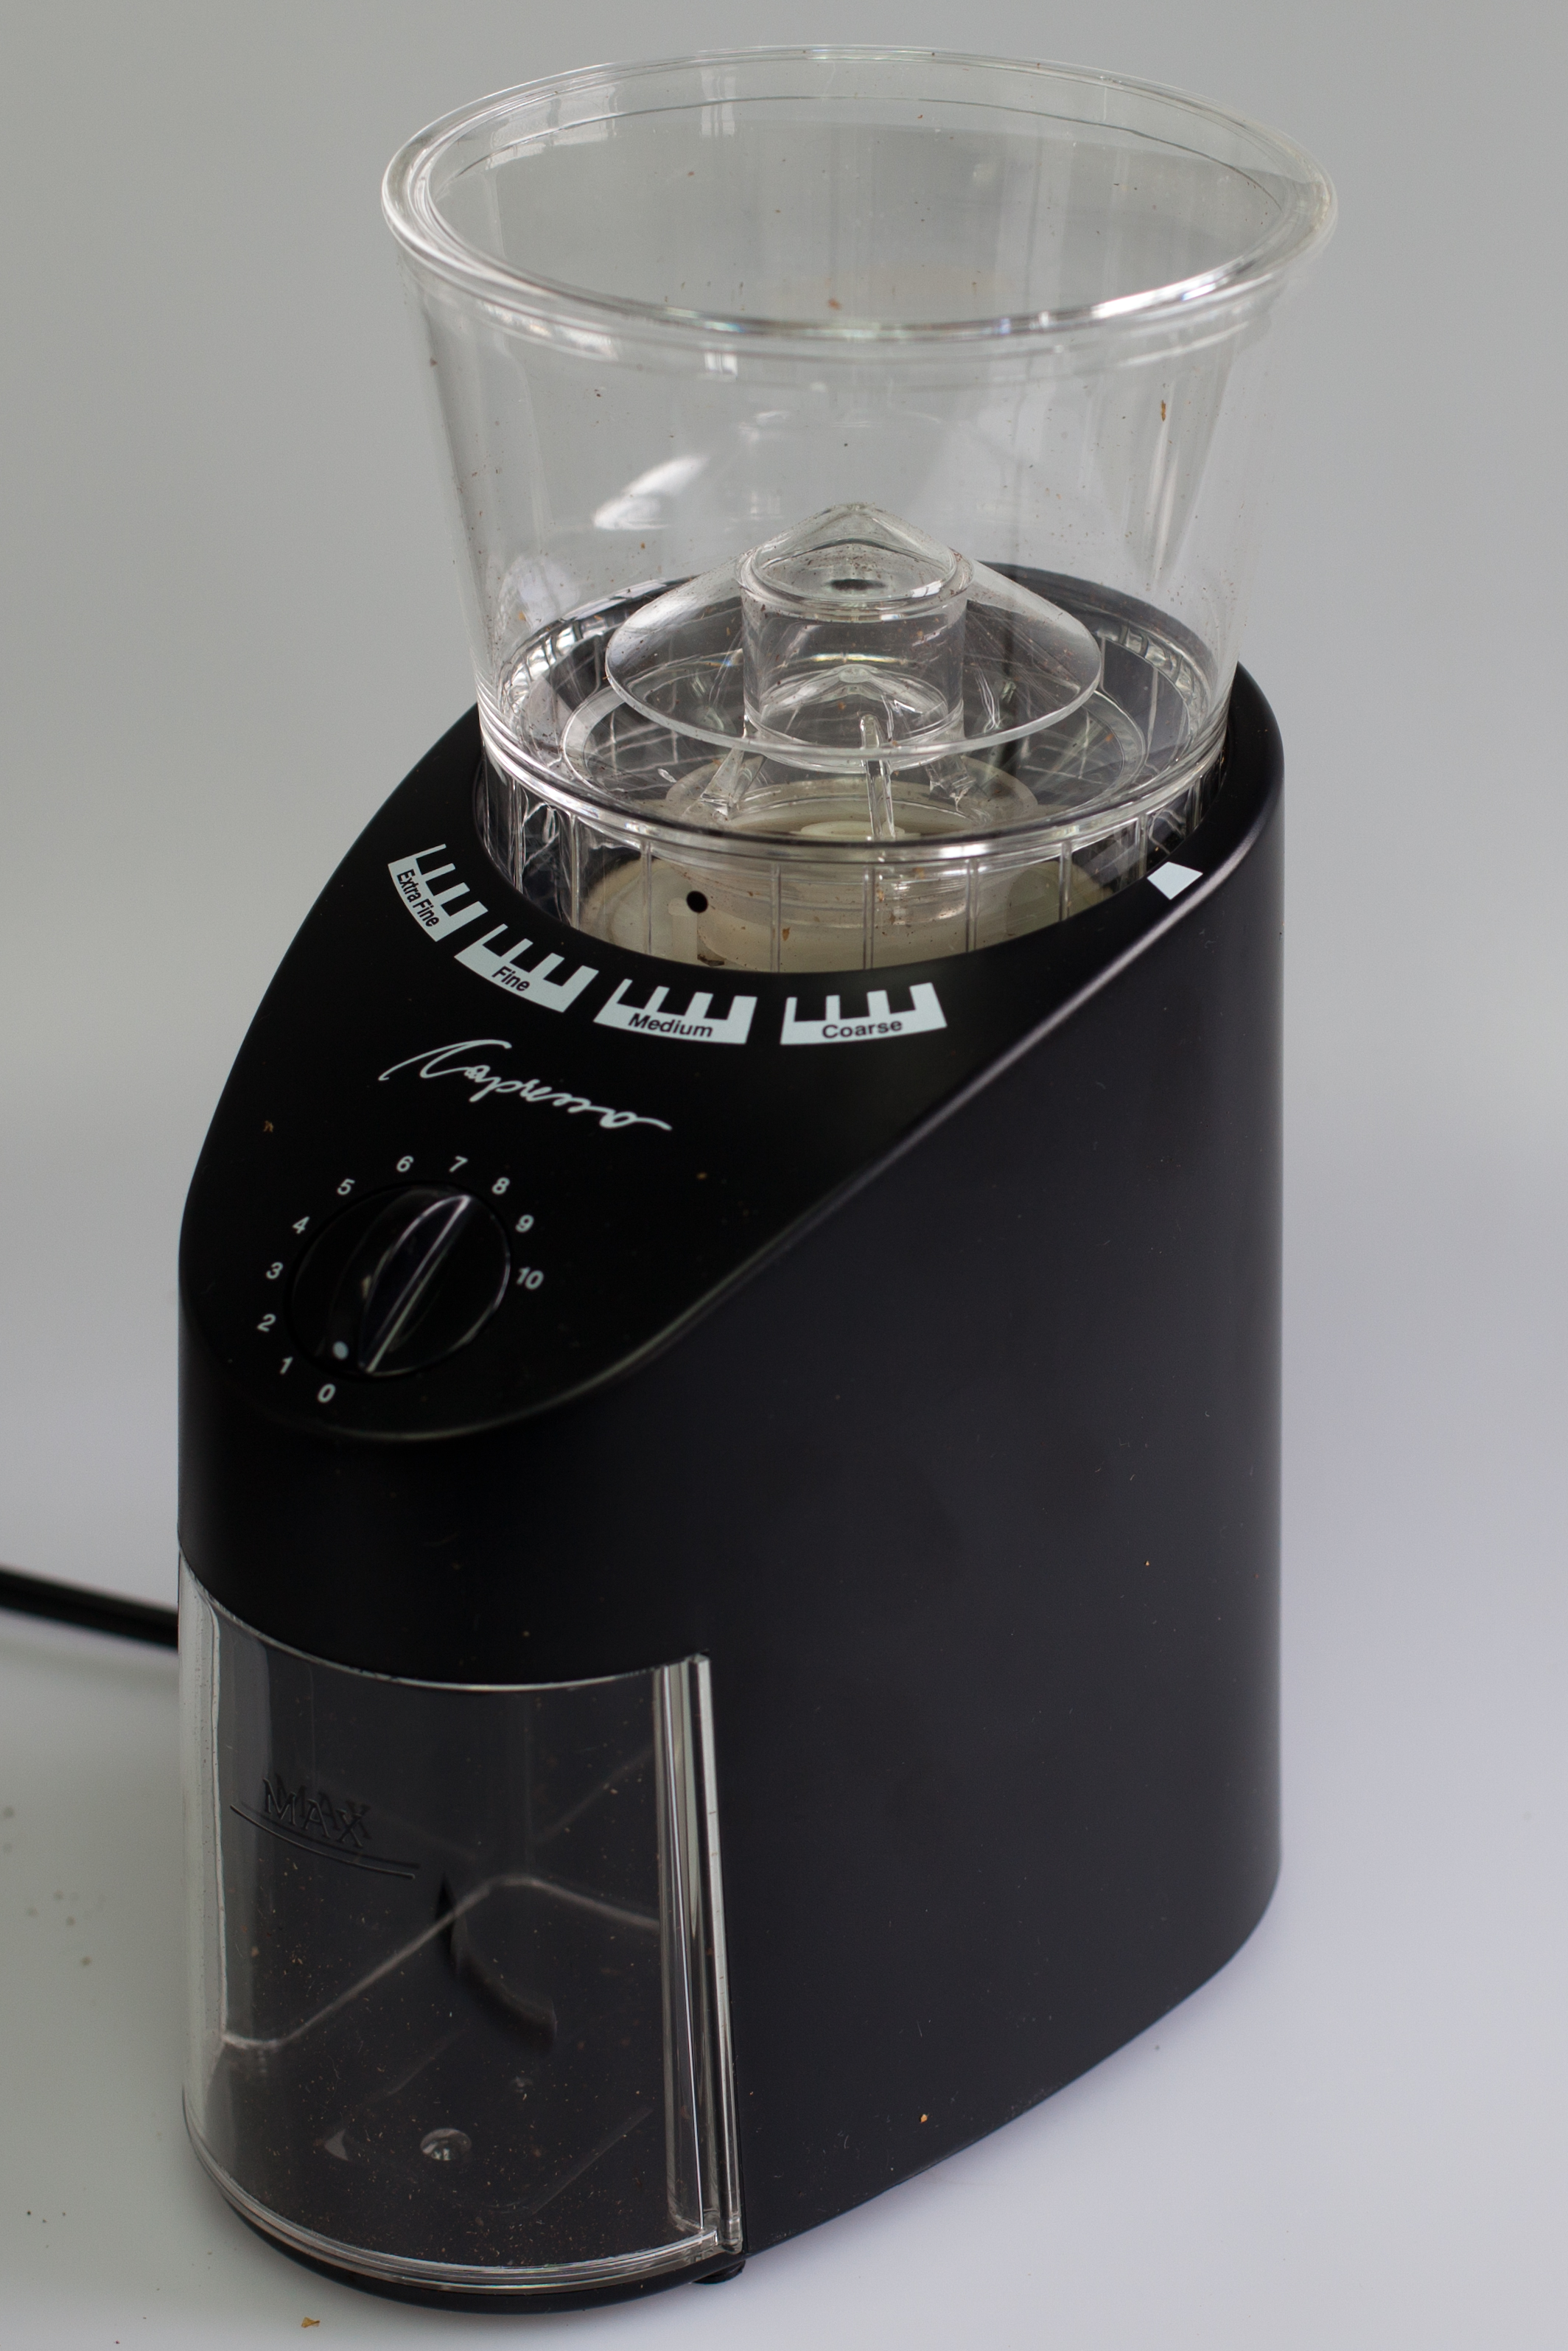 Capresso Infinity Plus Conical Burr Coffee Grinder - White